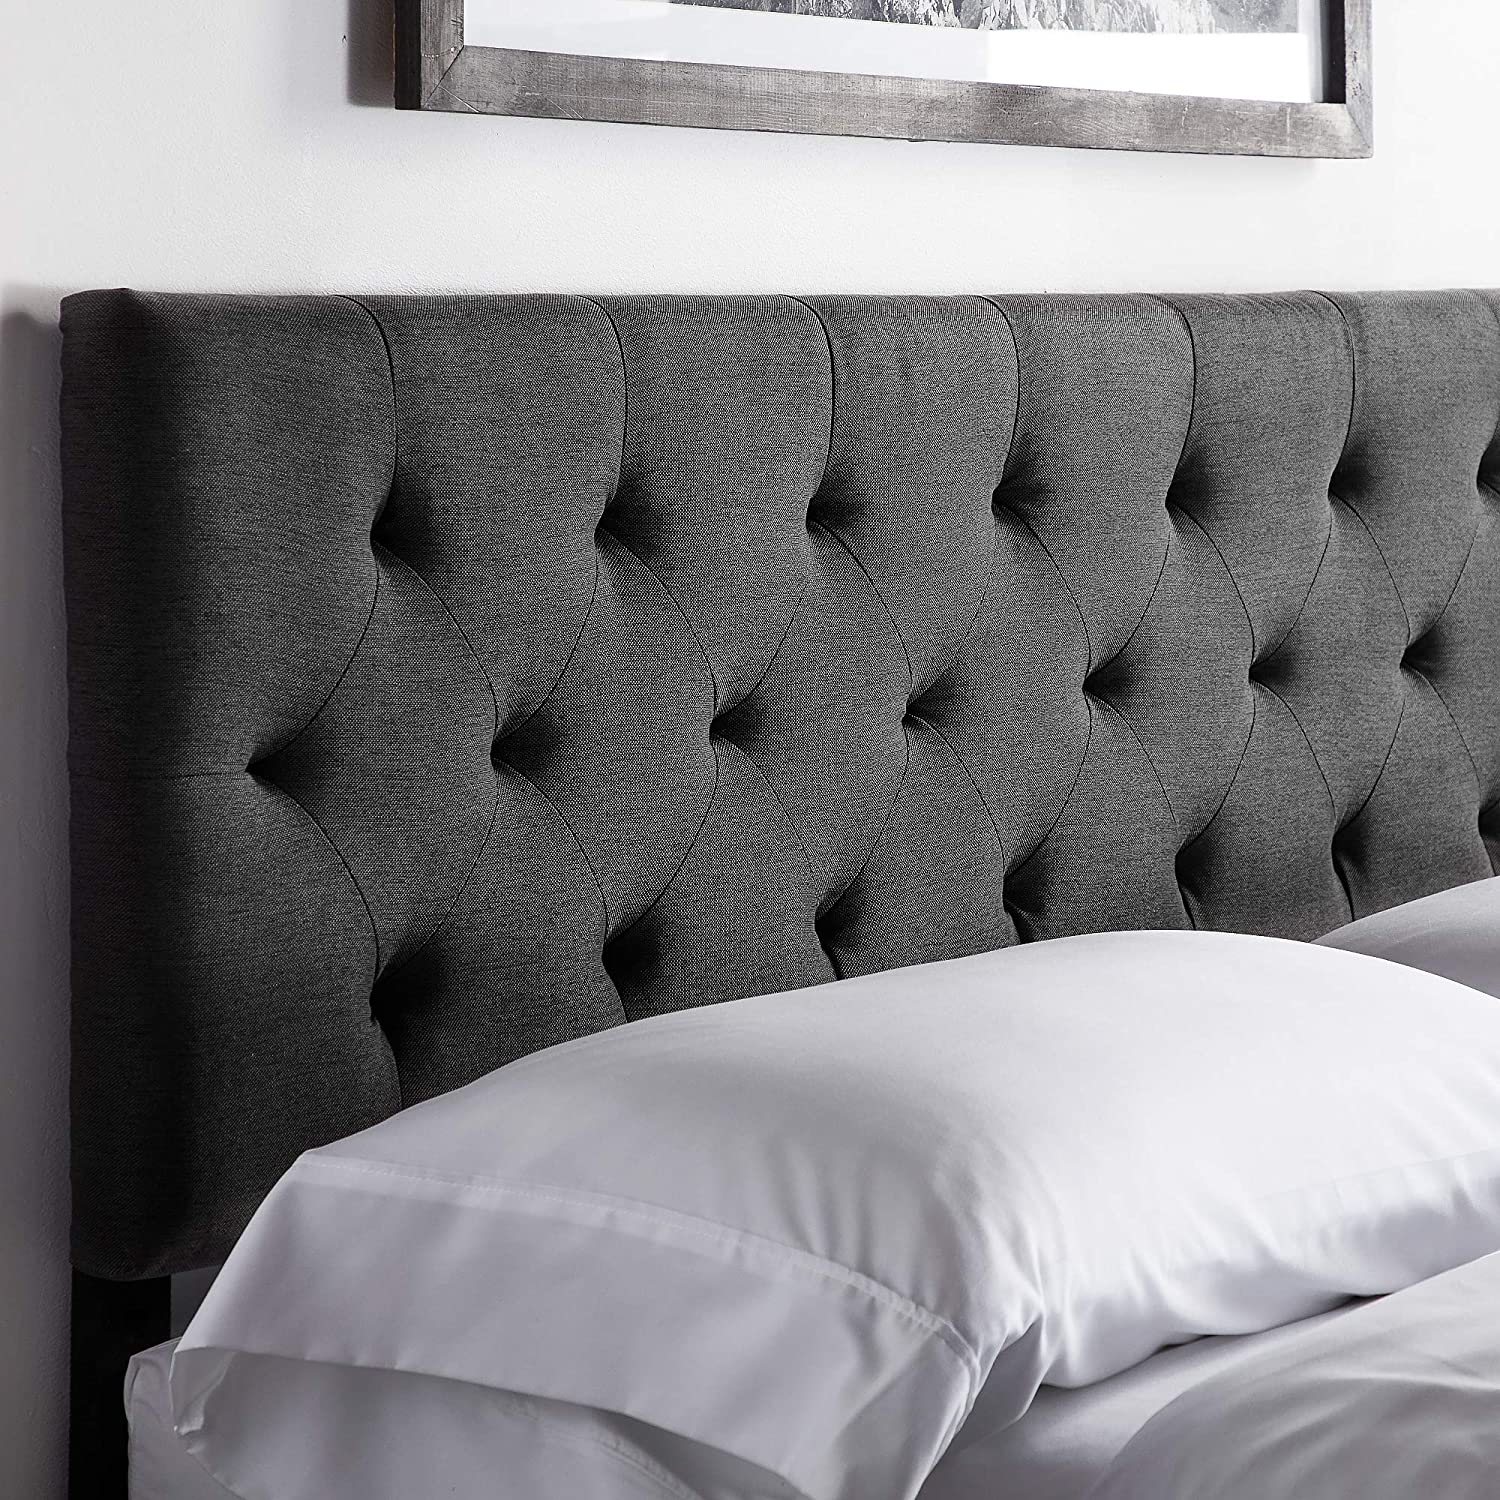 Mid-Rise Upholstered Headboard-Adjustable Height from 34” to 46” Twin - Queen - King